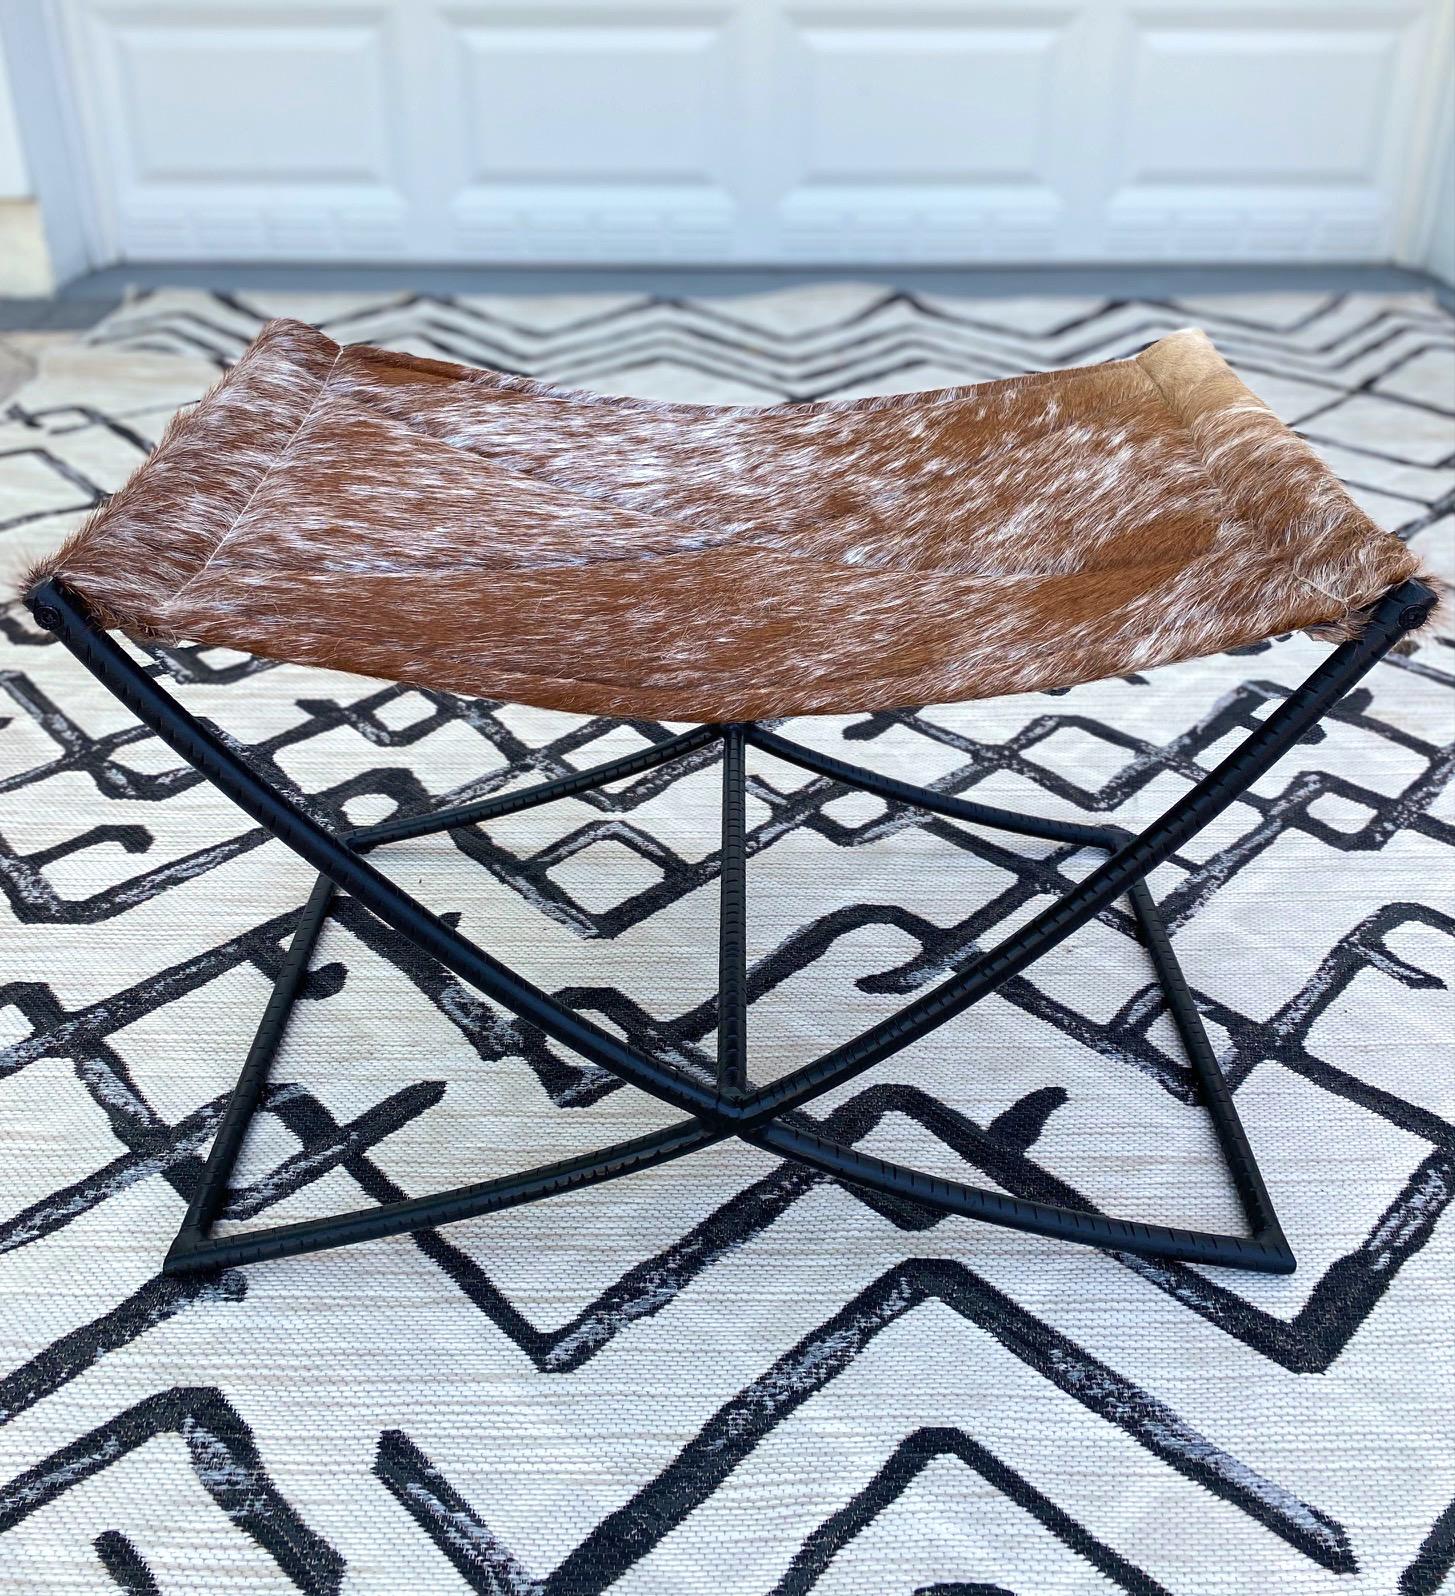 Genuine cowhide leather bench features a handcrafted sling seat with quilted diamond pattern. The stool has a Campaign Era design featuring a black wrought iron X- frame with incised grooves and with a center reinforcement bar. Makes a great accent